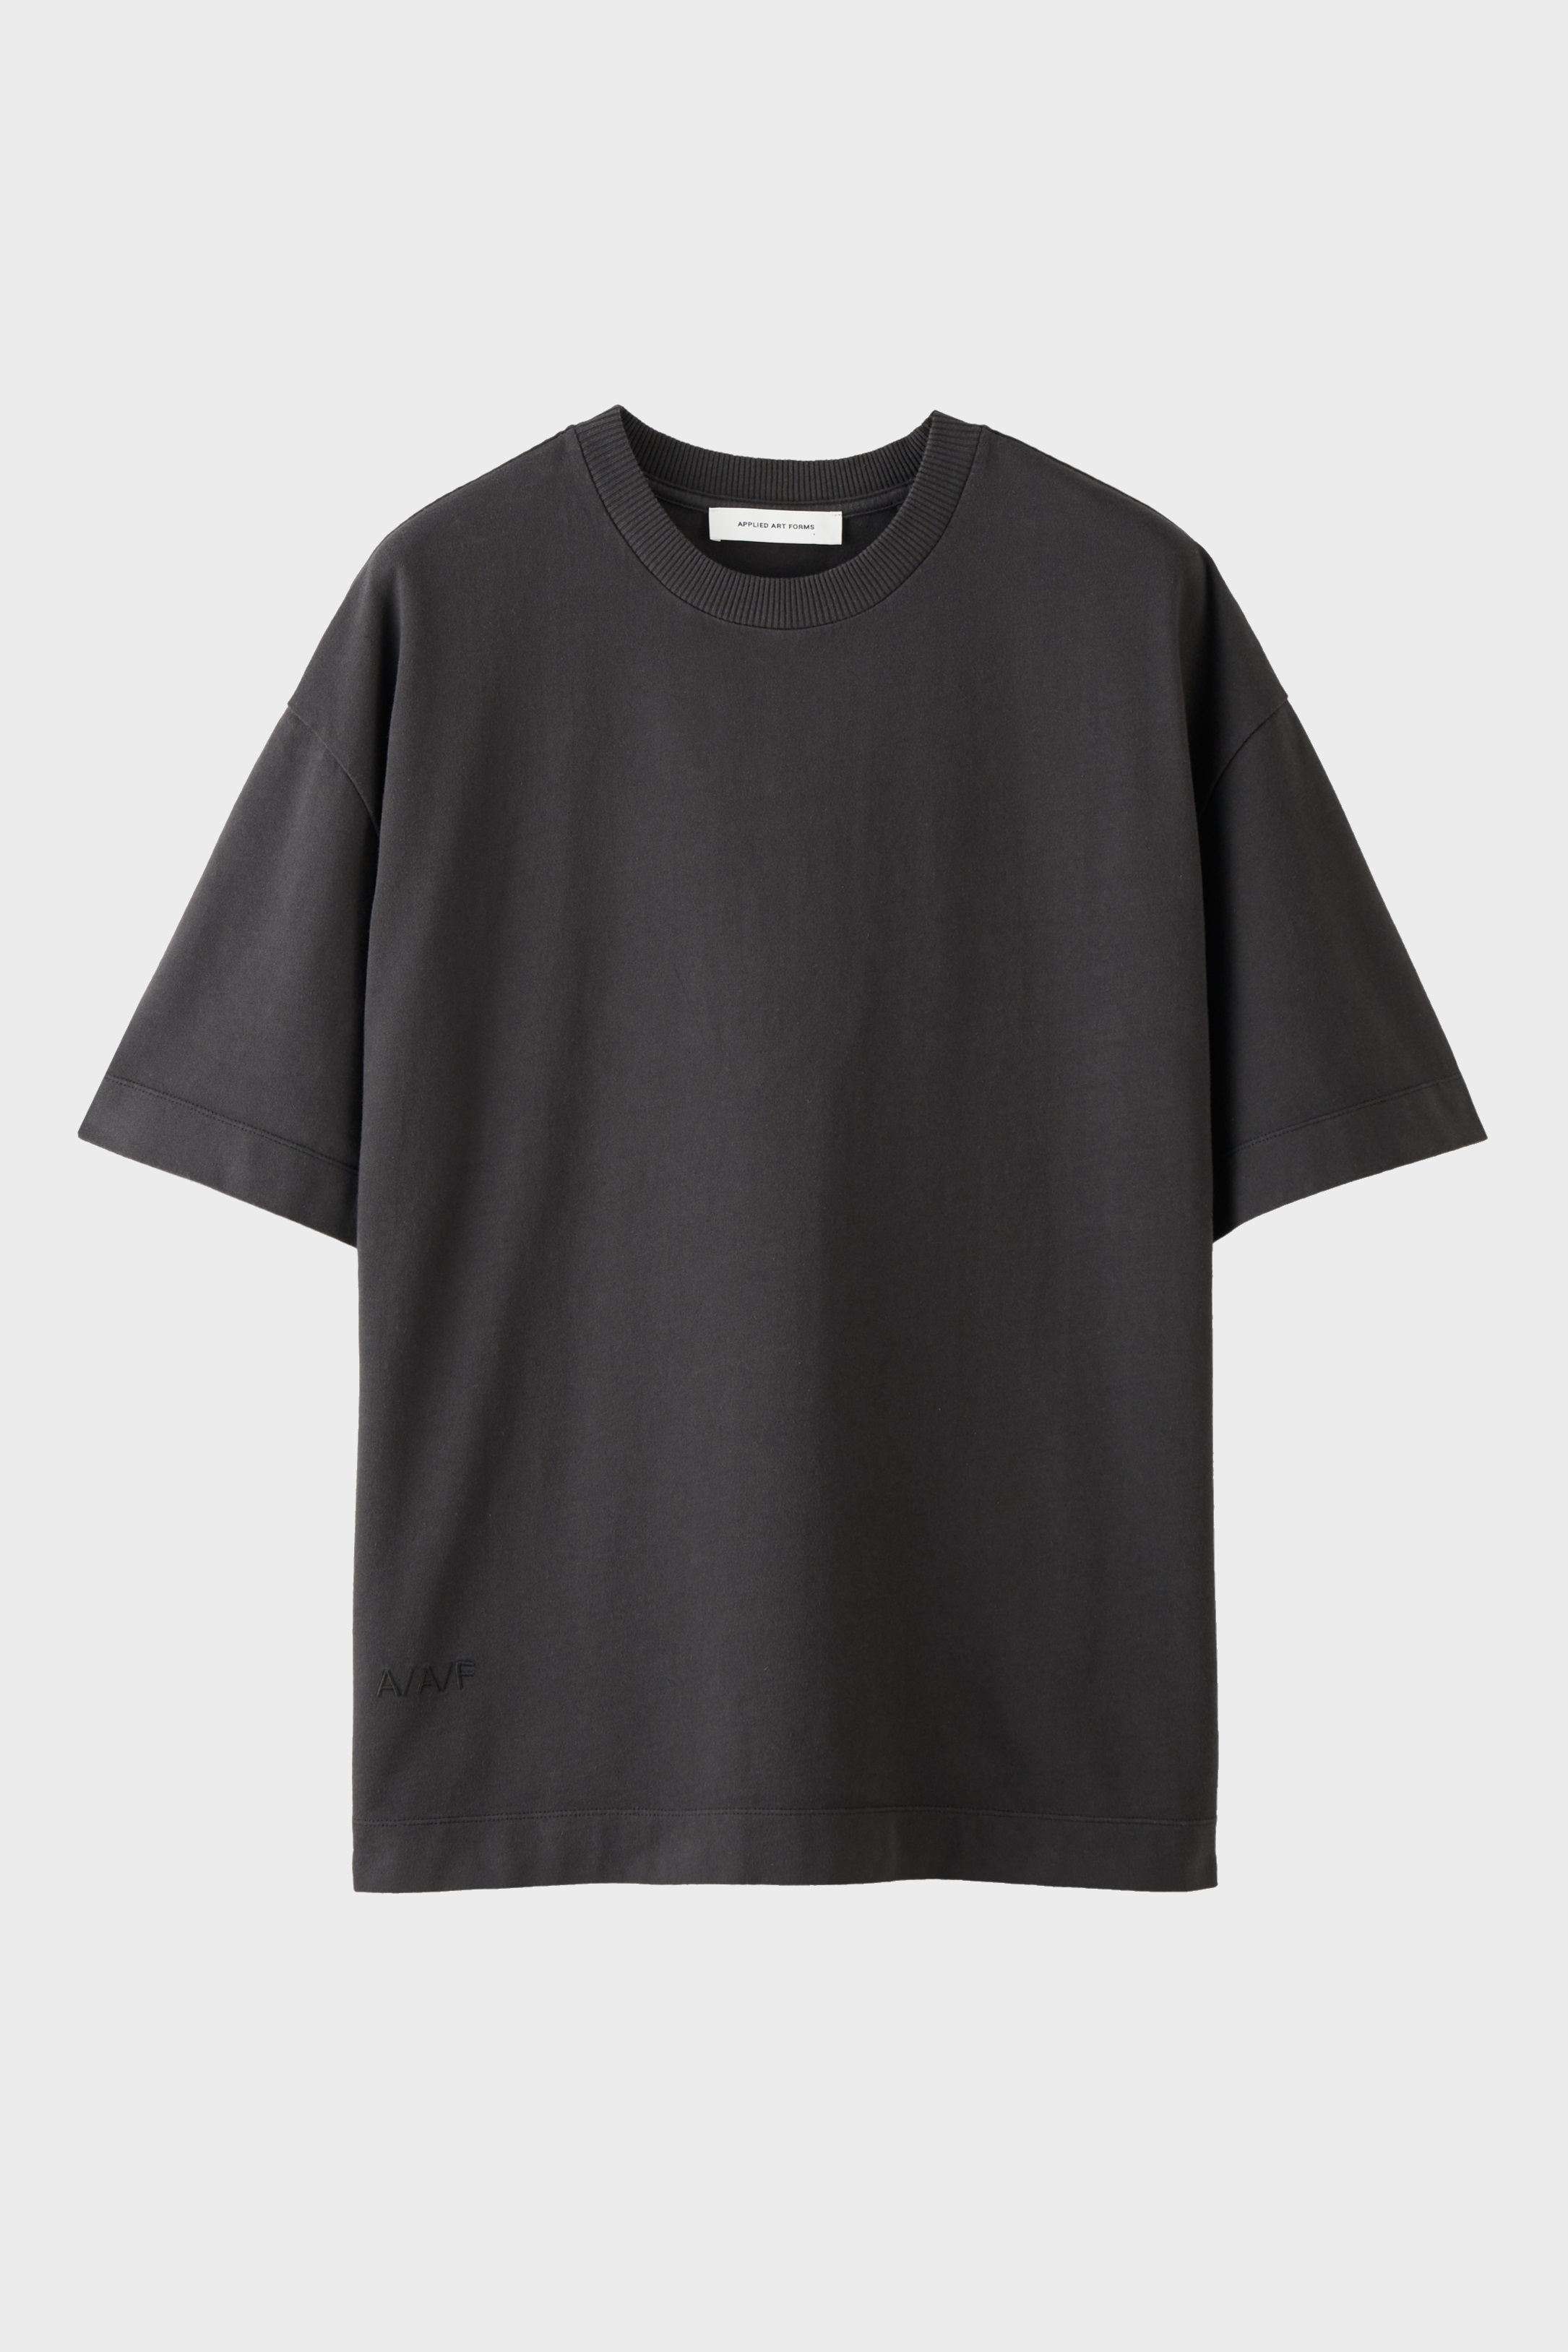 APPLIED ART FORMS Oversize T-Shirt in Charcoal S